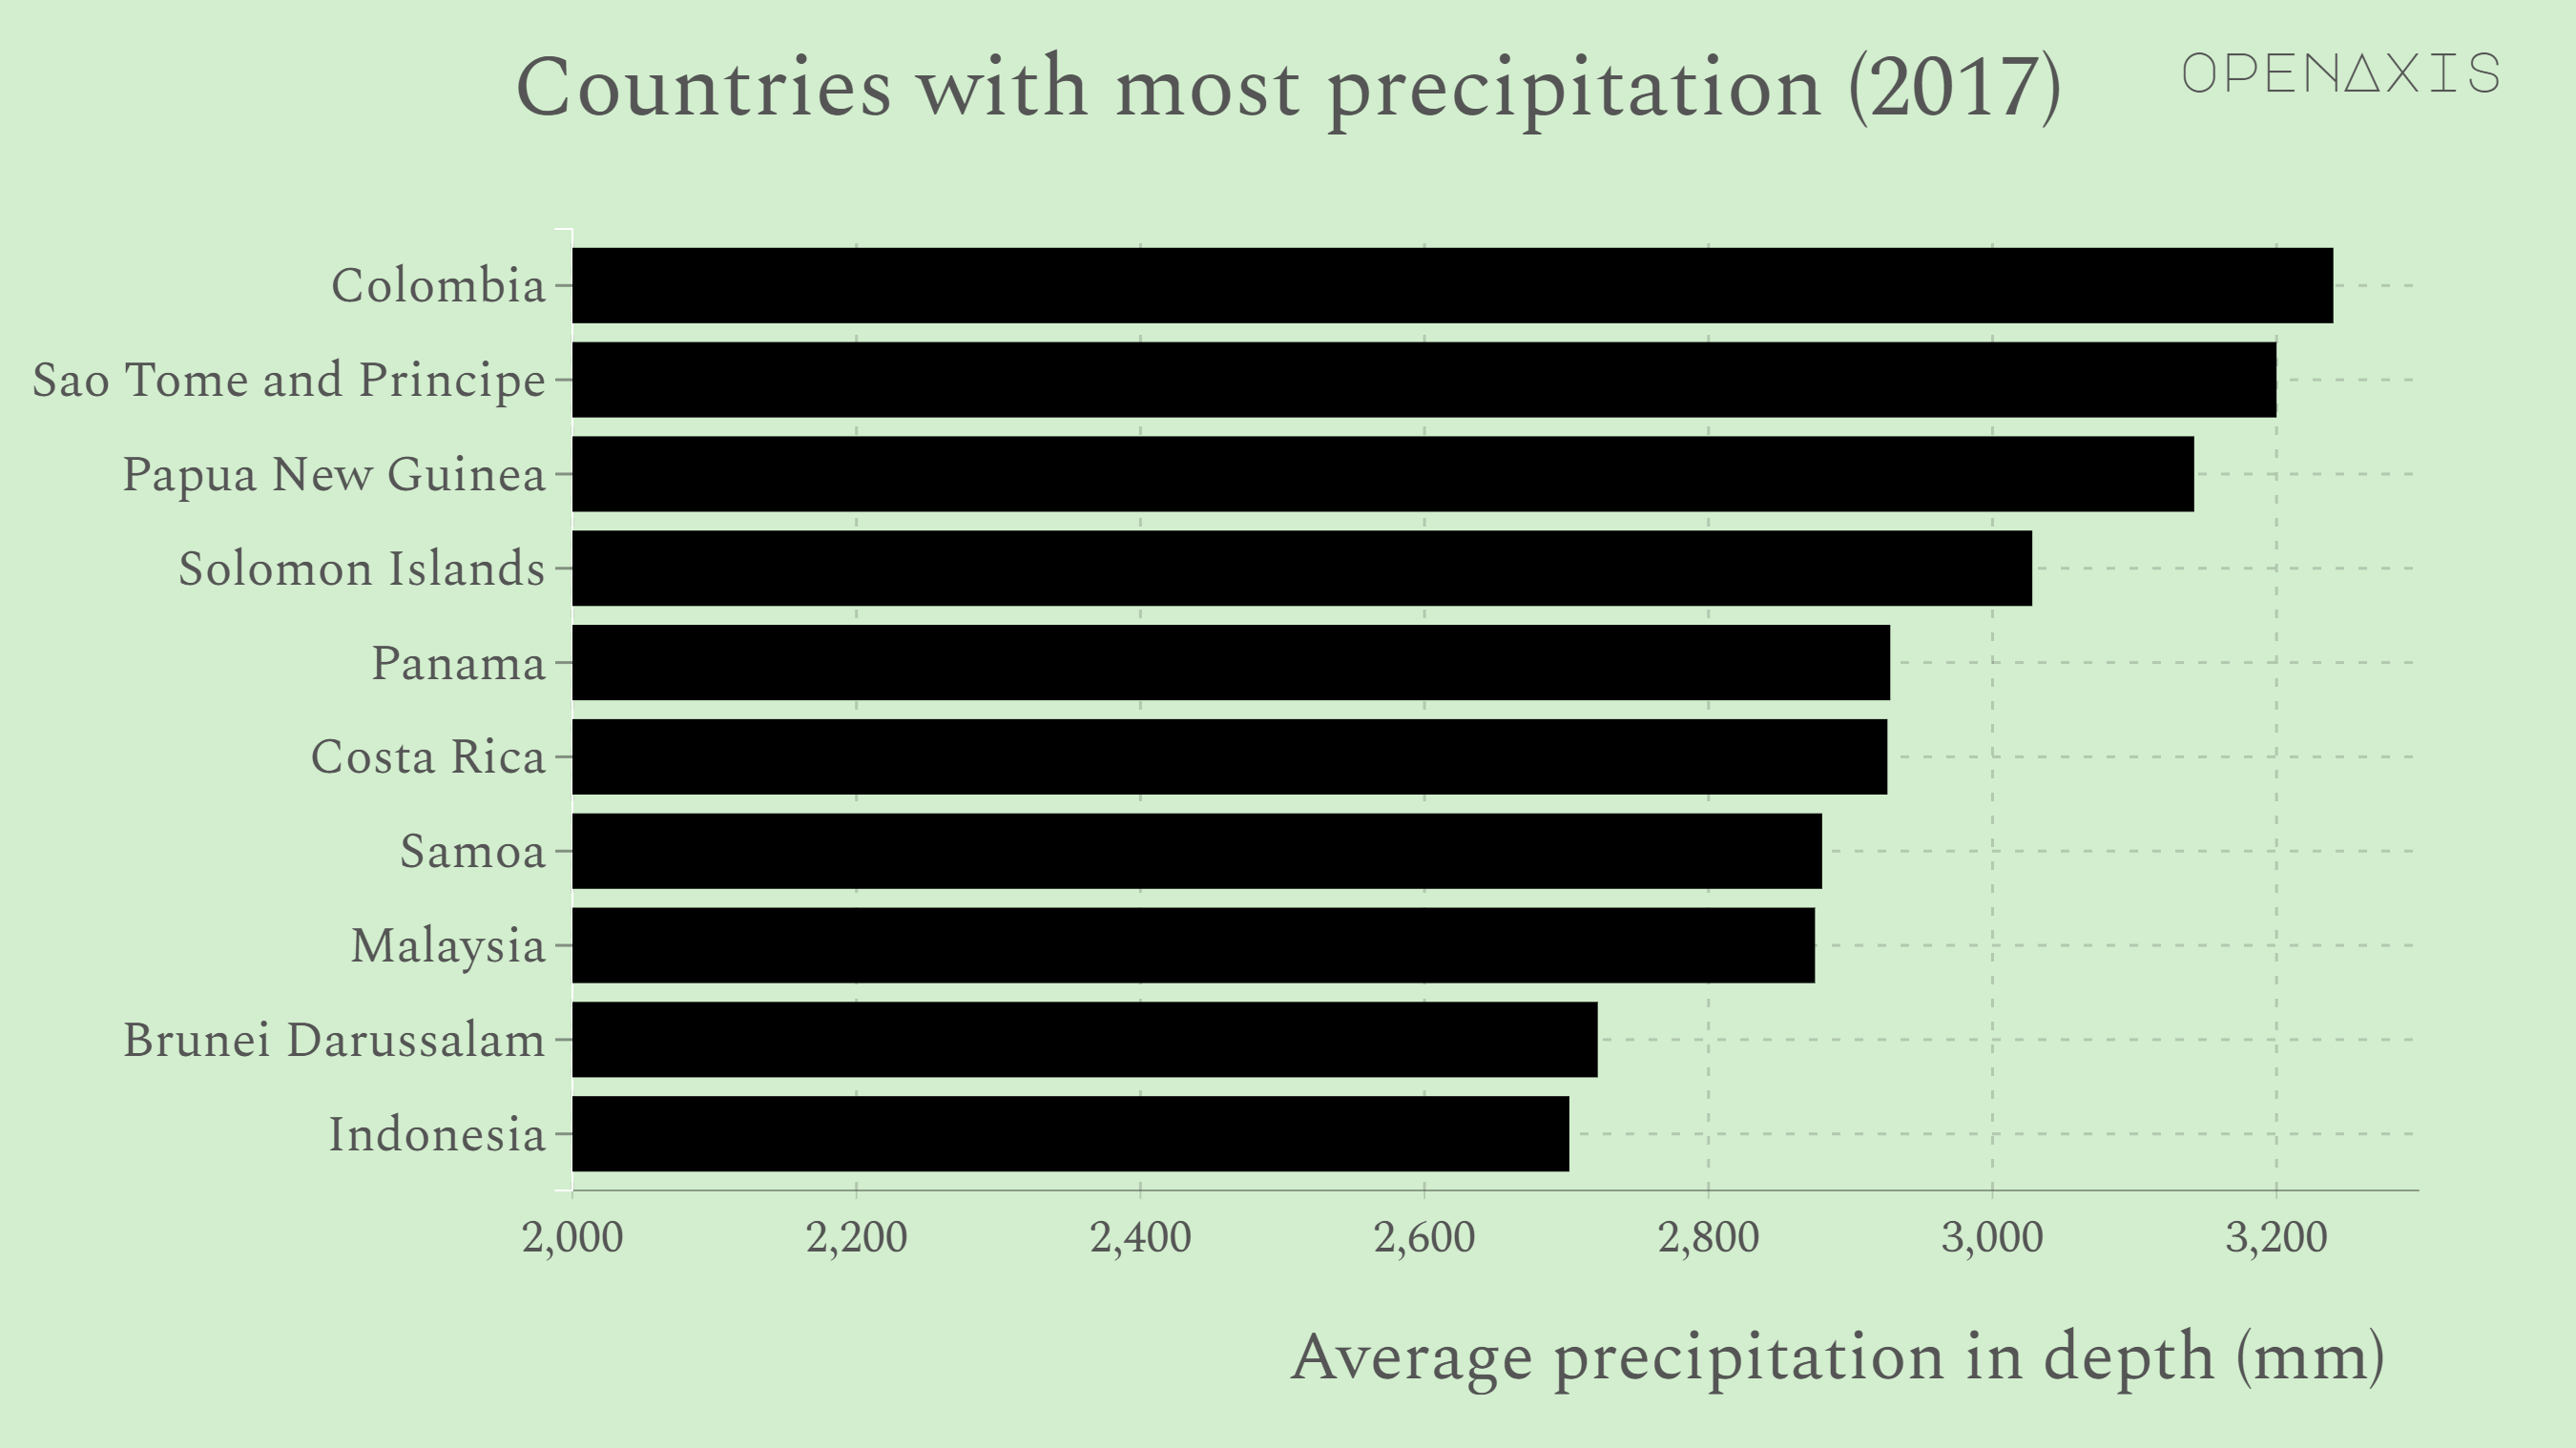 "Countries with most precipitation (2017)"